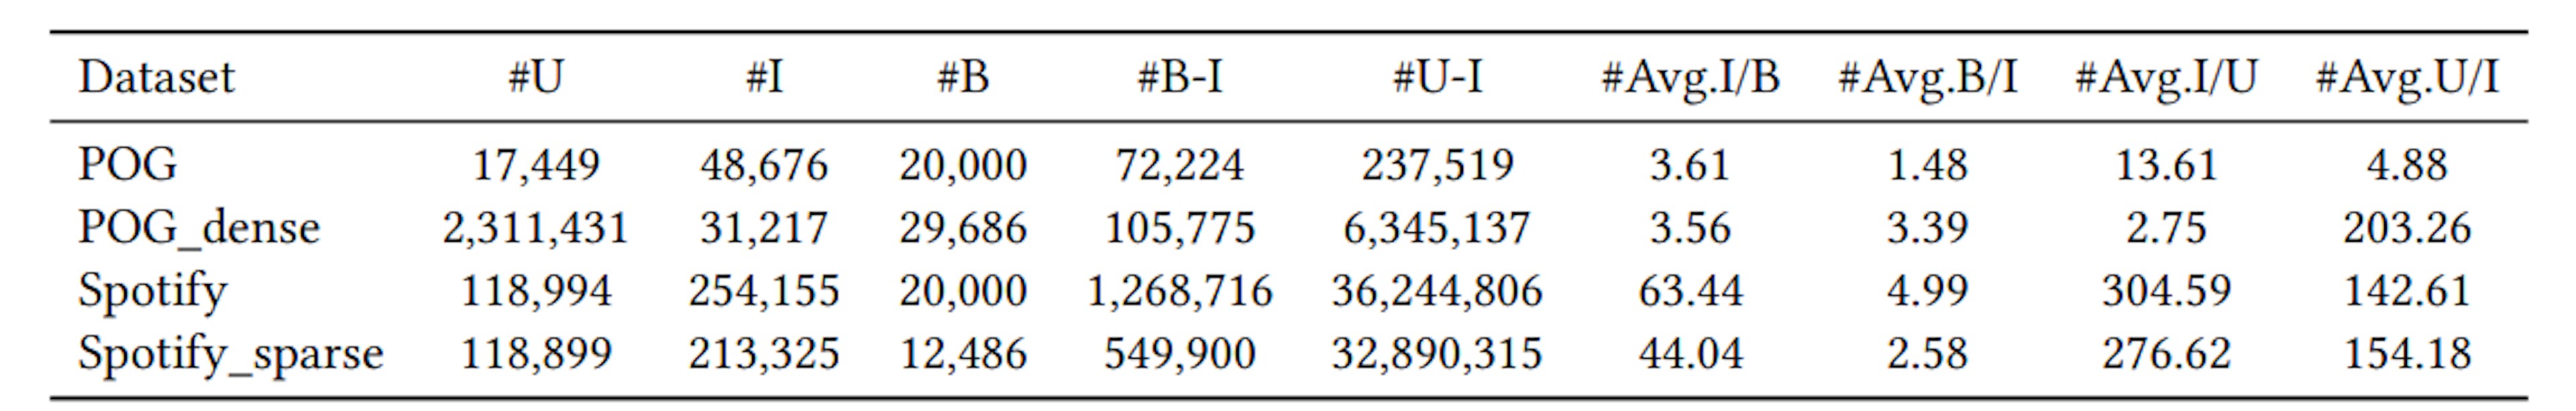 Table 1: The statistics of the four datasets on two different domains.